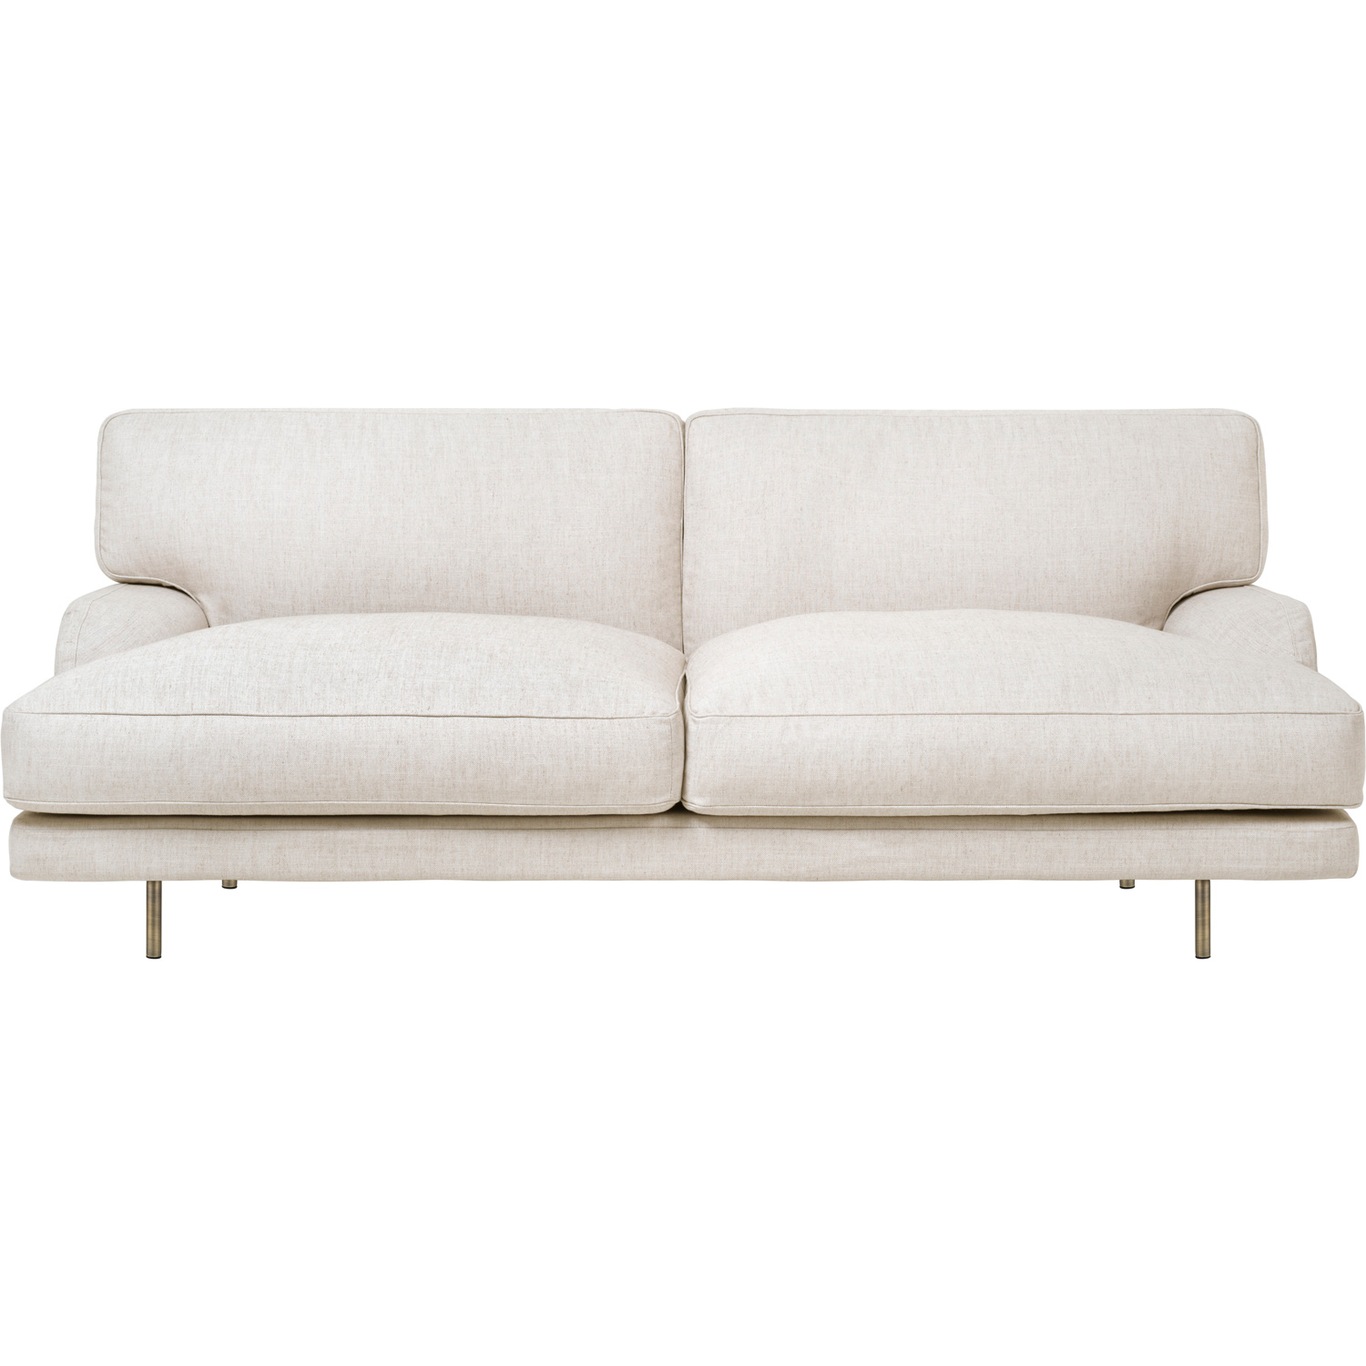 Flaneur Sofa FC 2-Sitzer, Beine Messing / Hot Madison 419 Off White